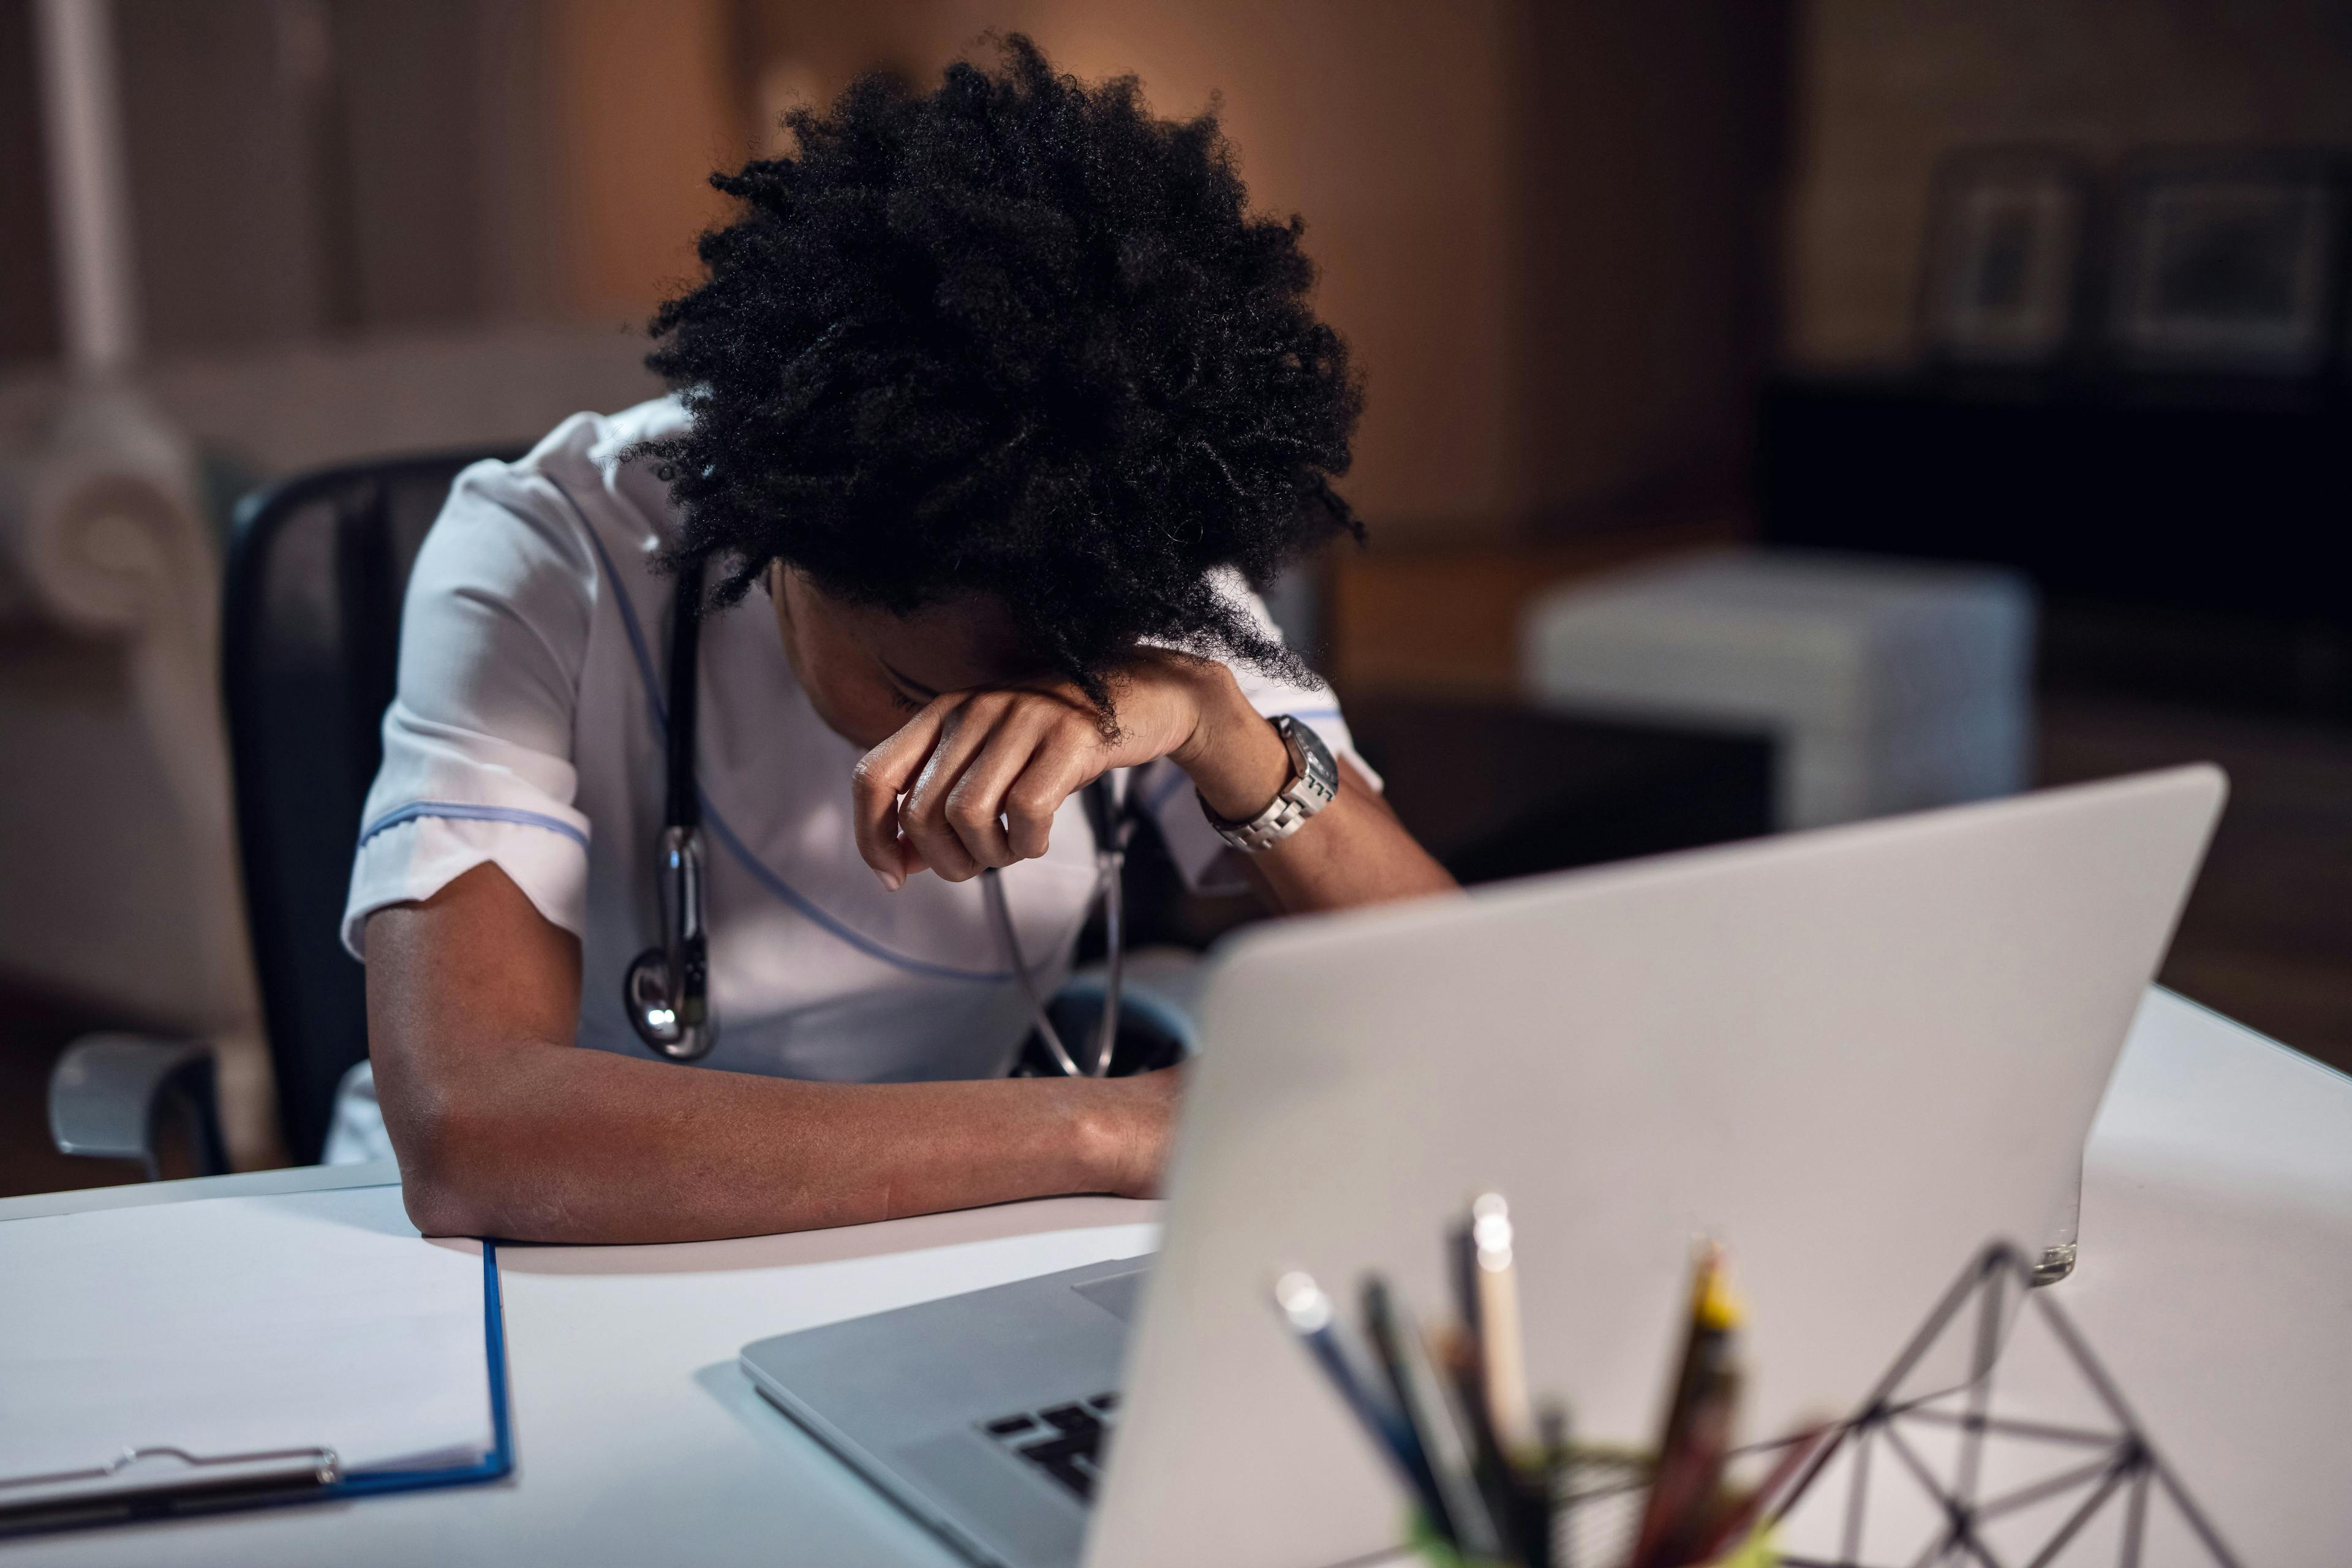 Healthcare workers cite more burnout, and more are thinking of a career change